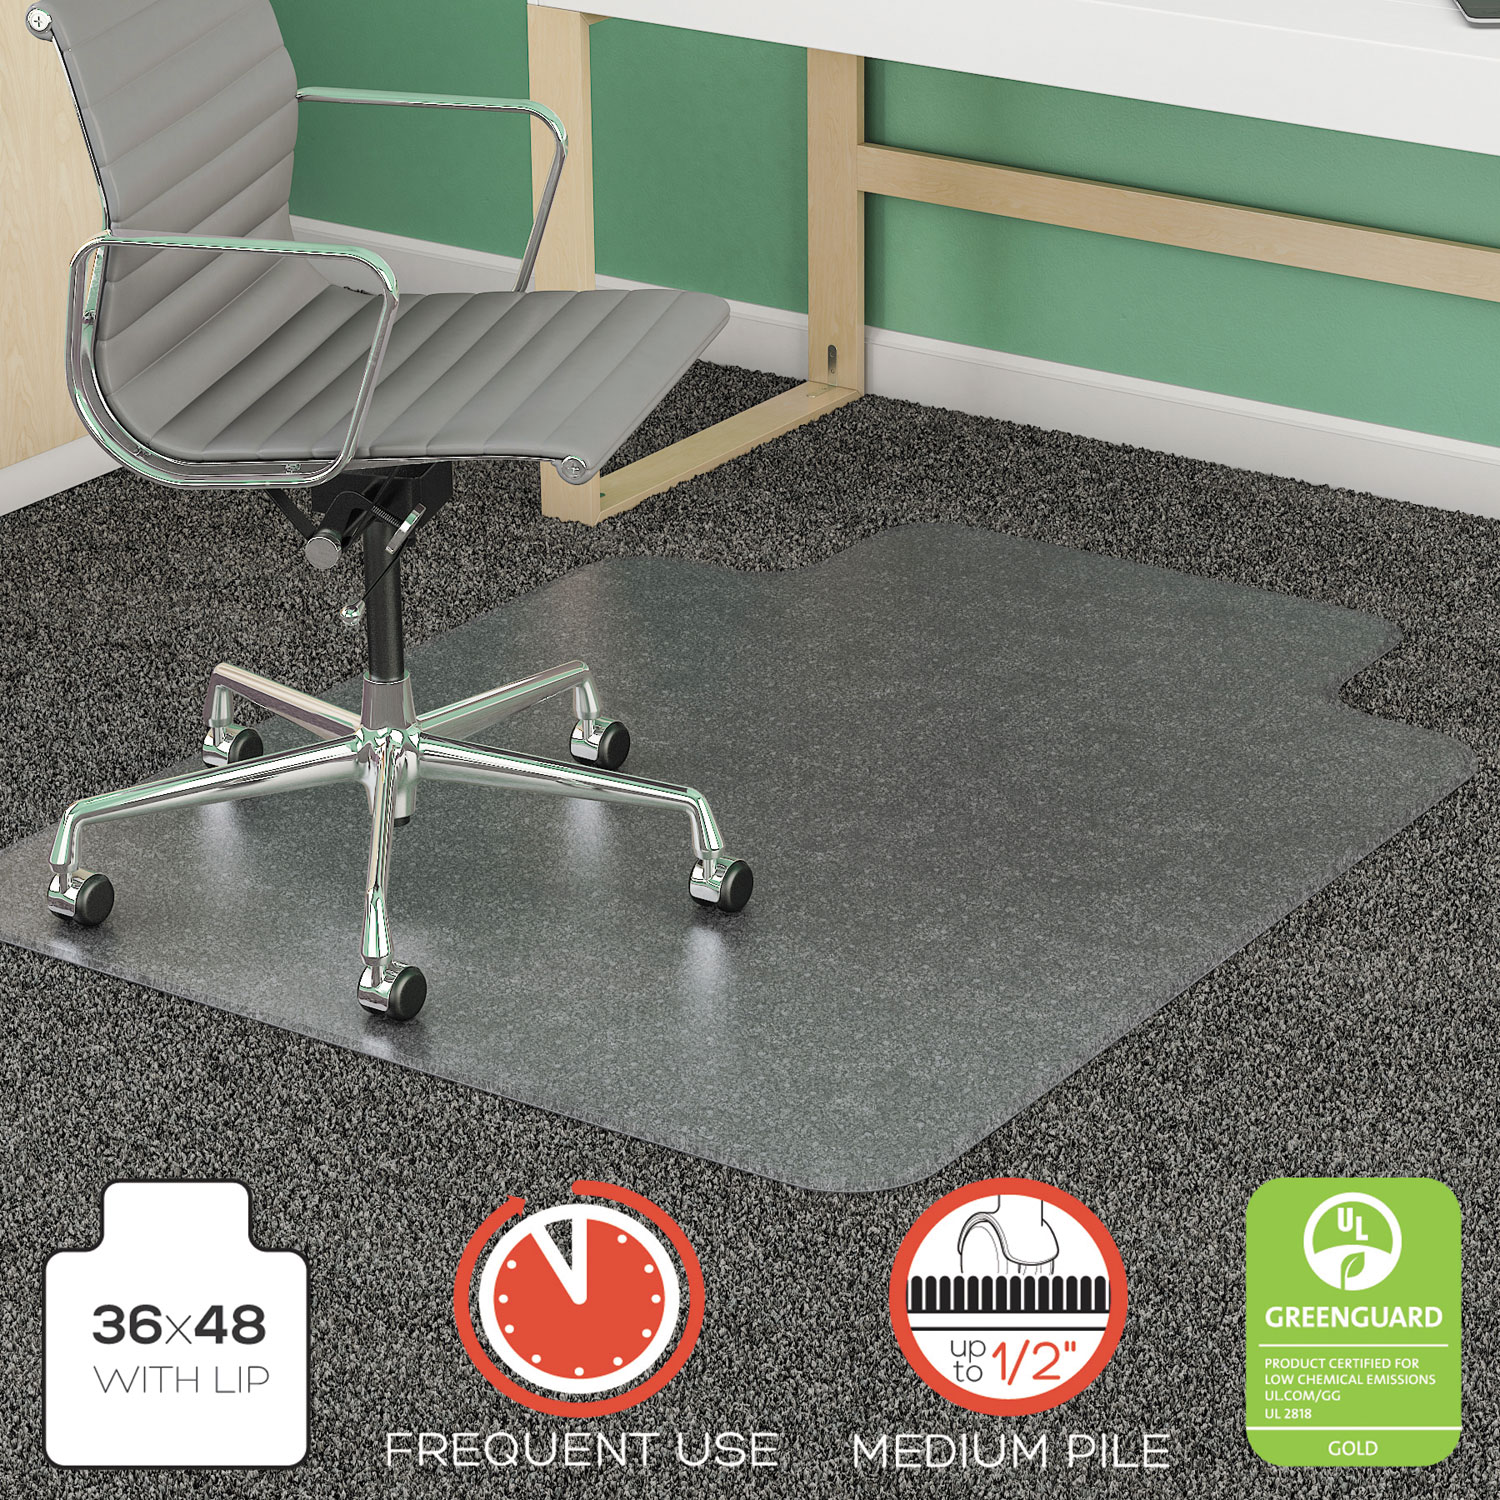  deflecto CM14113COM SuperMat Frequent Use Chair Mat, Med Pile Carpet, Roll, 36 x 48, Lipped, Clear (DEFCM14113COM) 